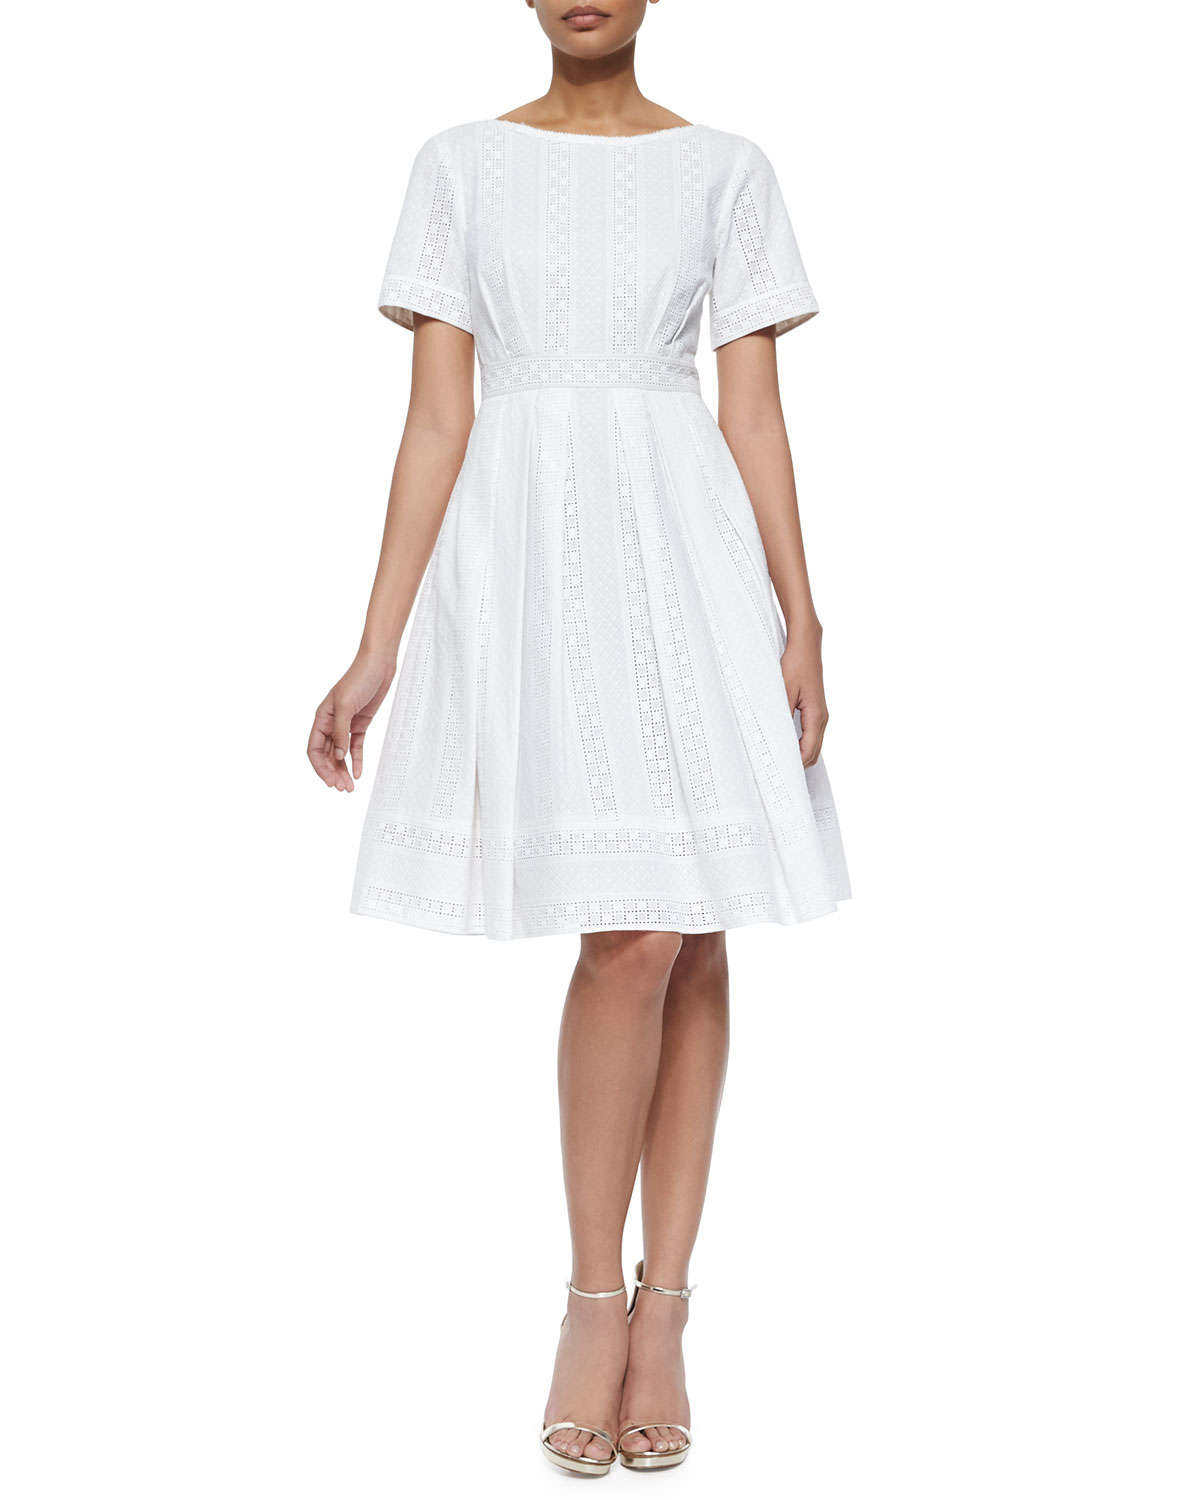 Lyst - Kay Unger Short-sleeve Lace-detail Fit & Flare Dress in White